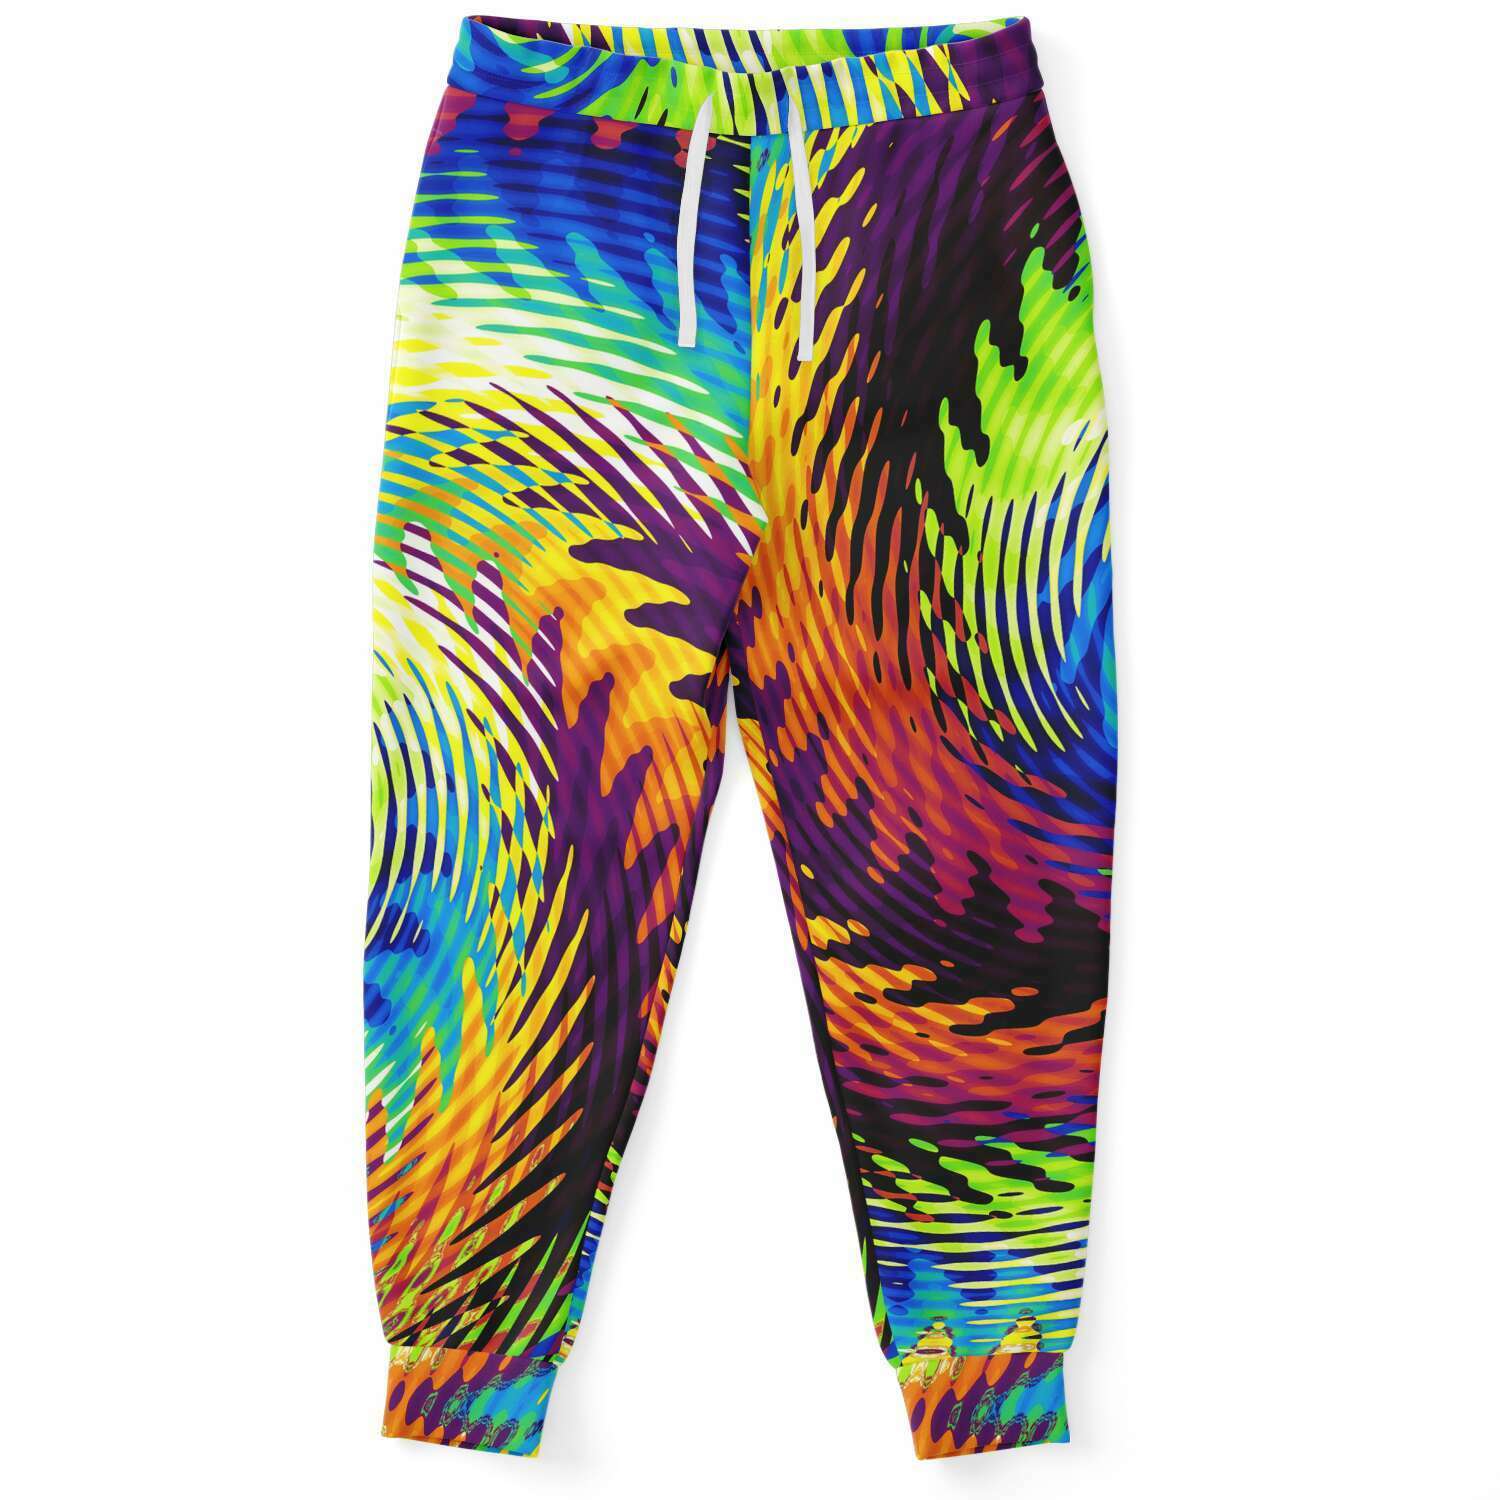 Cool Vibes Paint Splash Abstract Summer Beach Waves Psychedelic Unisex Joggers - kayzers